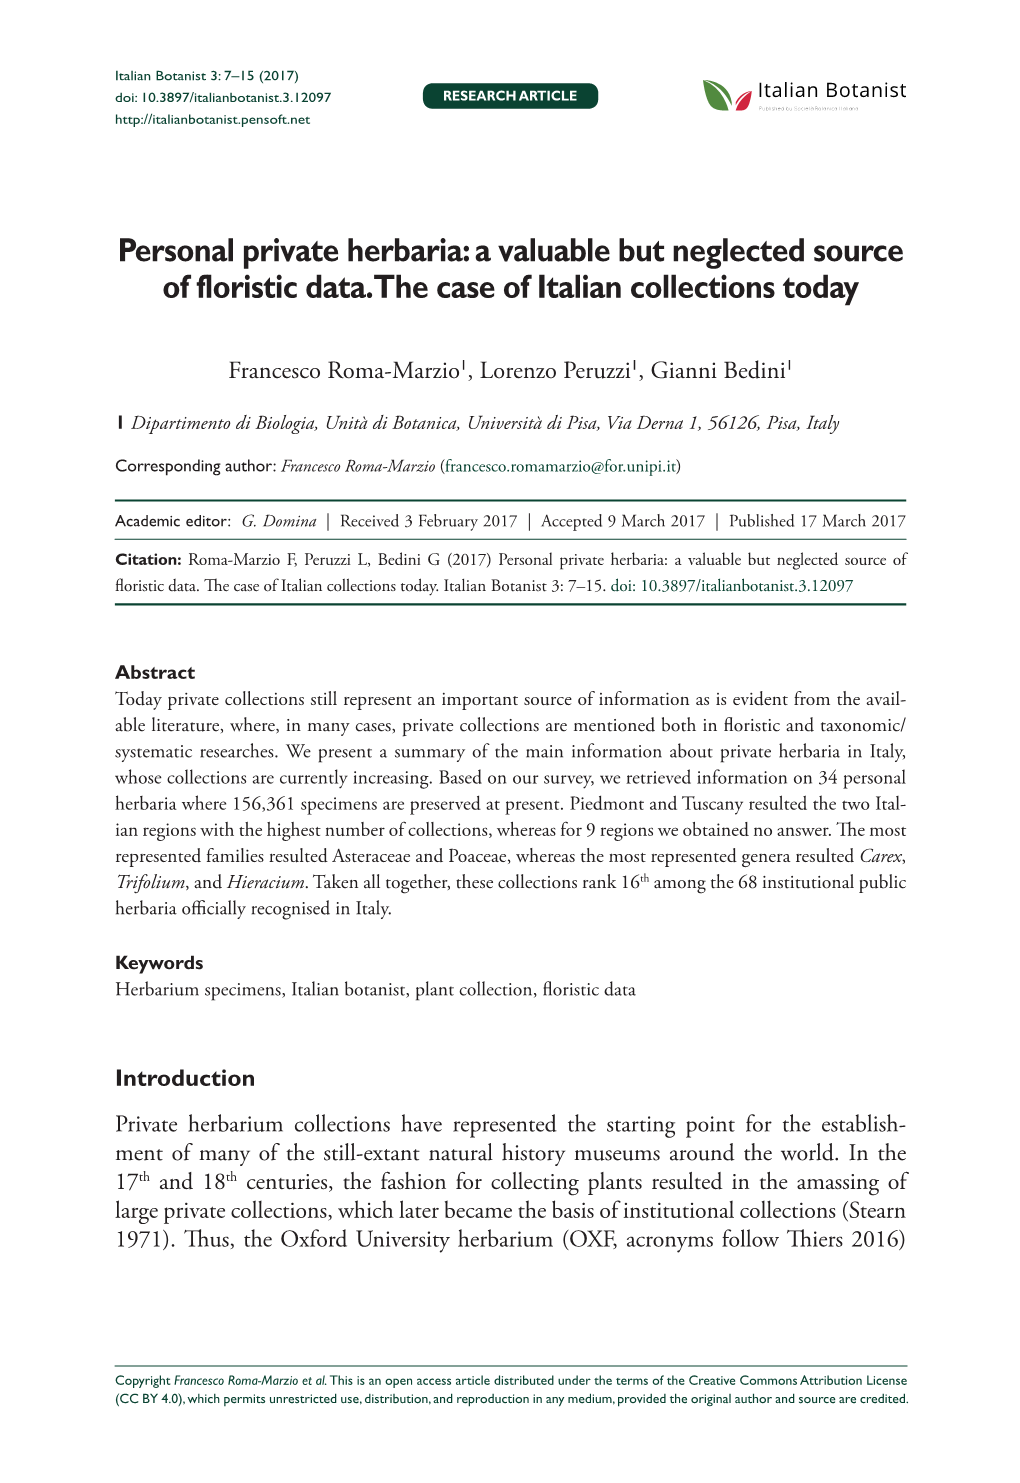 ﻿Personal Private Herbaria: a Valuable but Neglected Source of Floristic Data